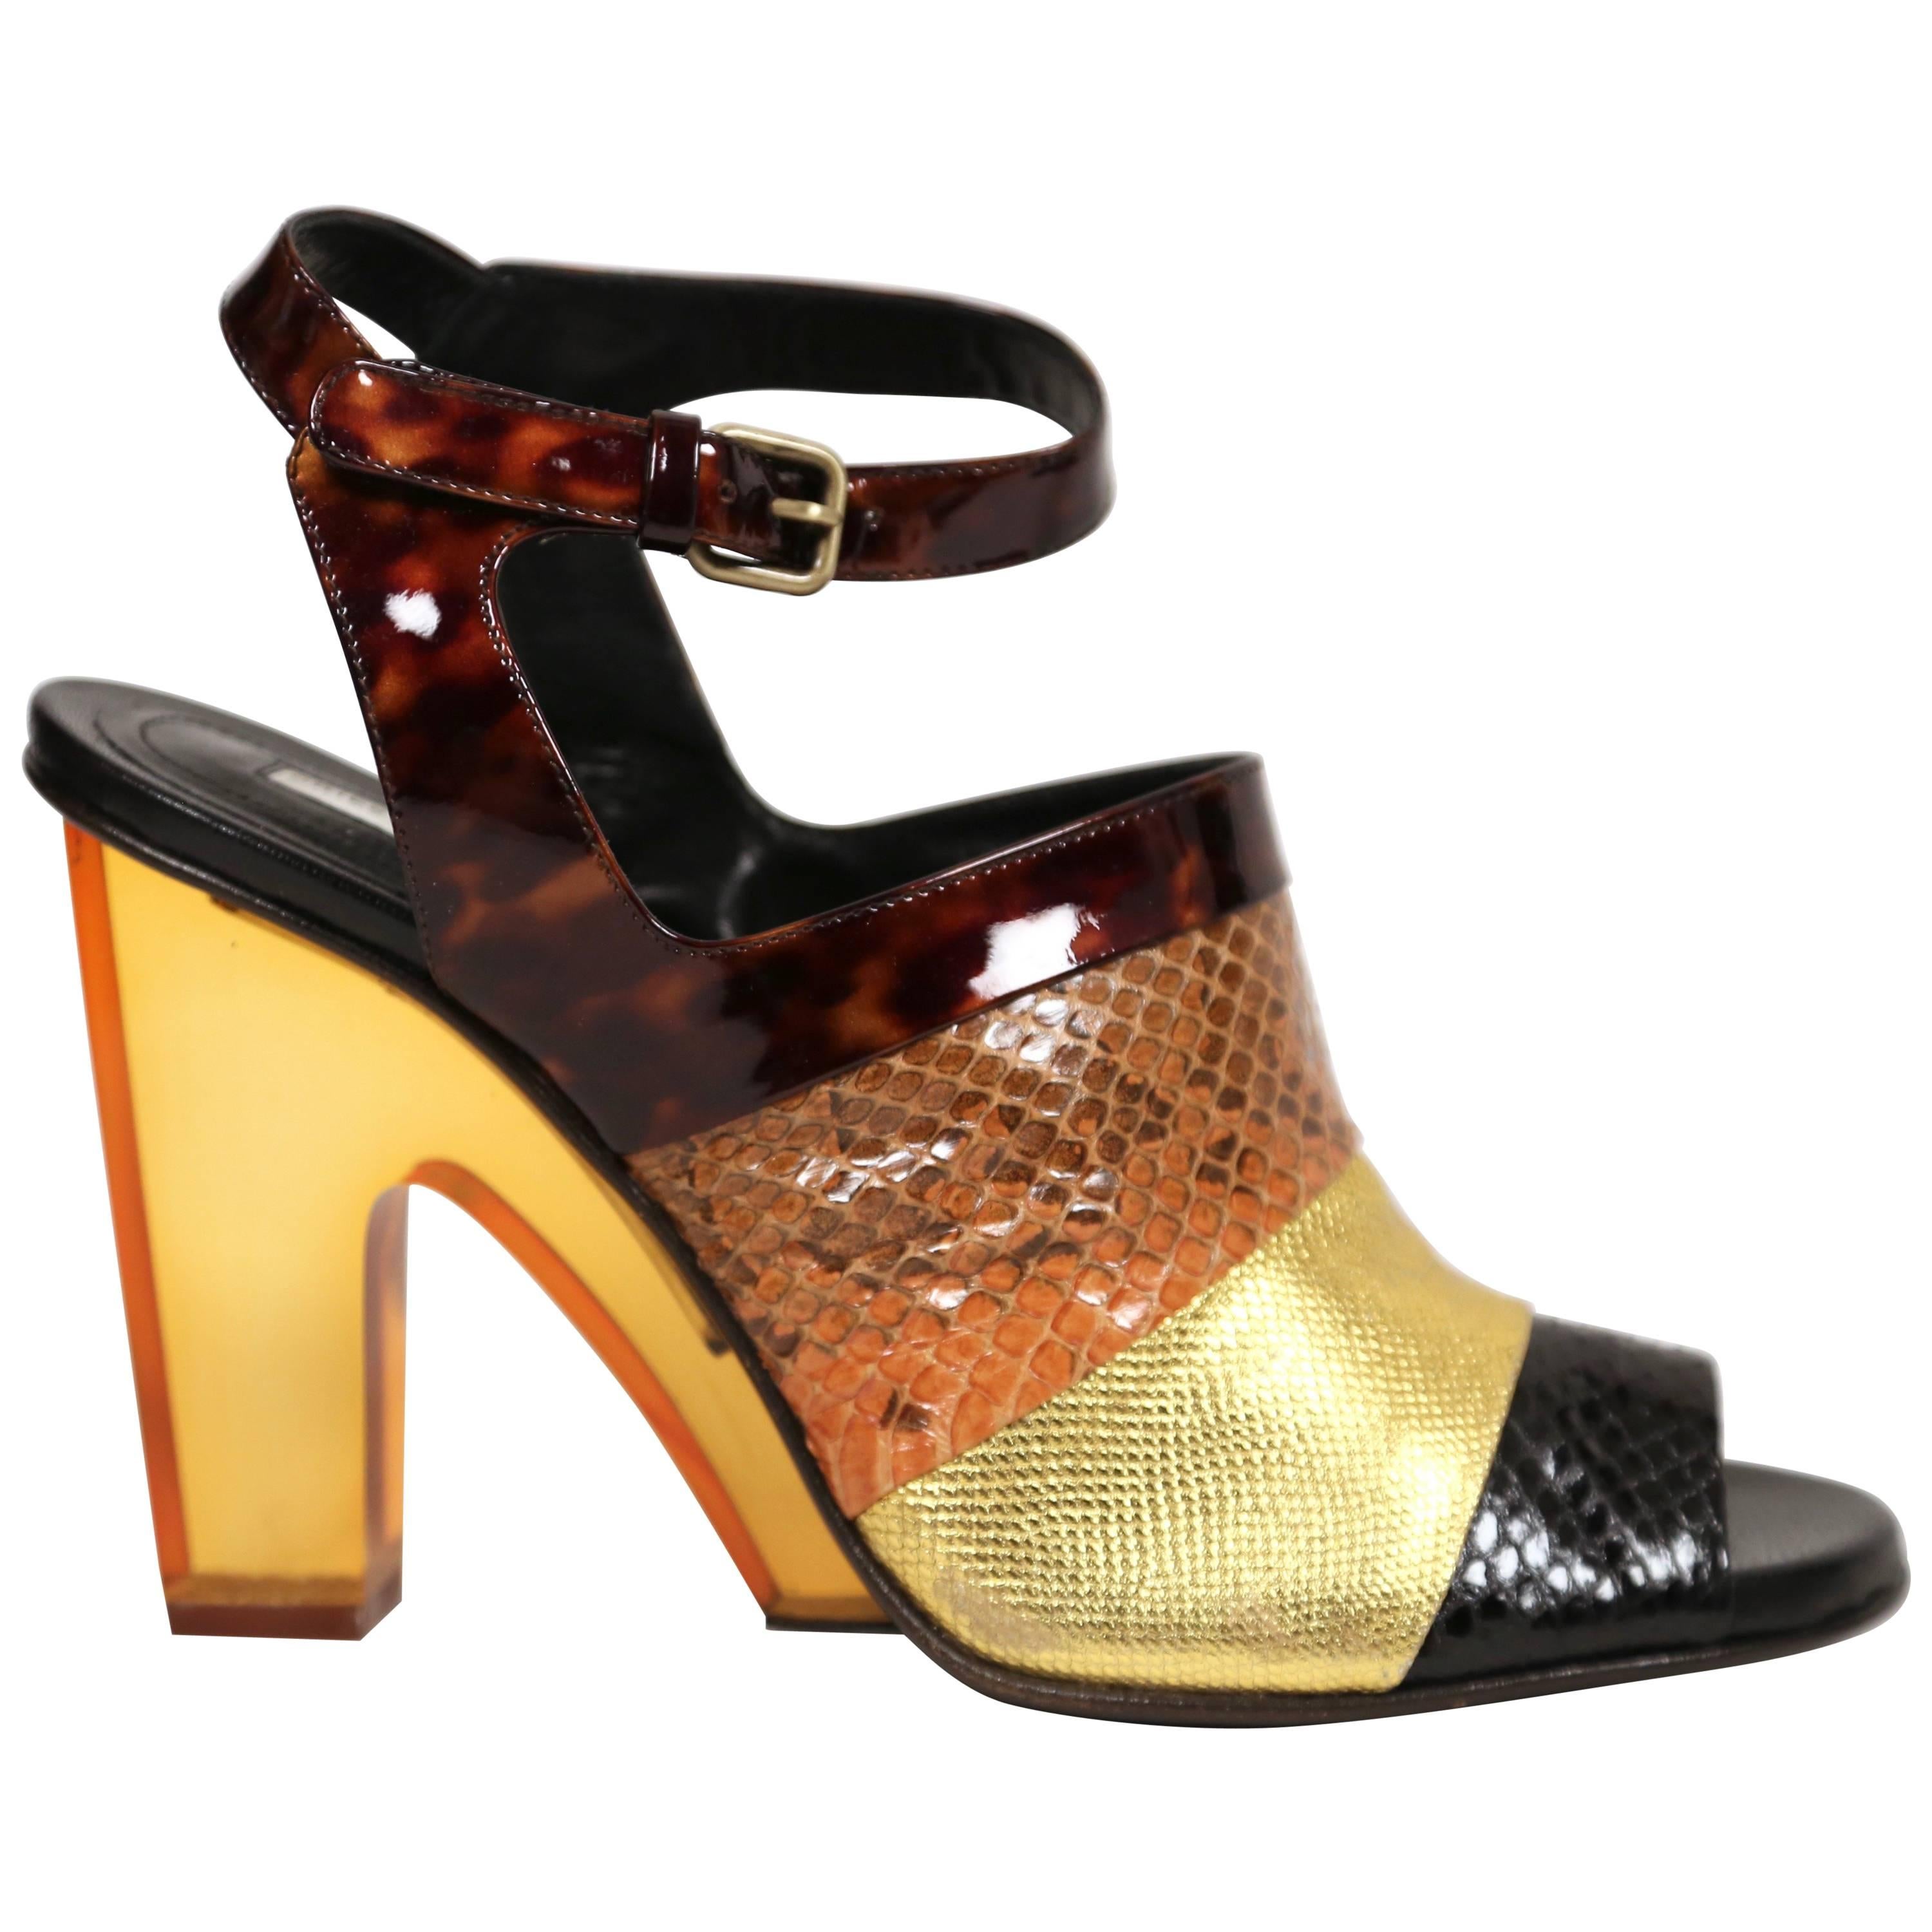 DRIES VAN NOTEN reptile leather shoes with lucite heels - 41